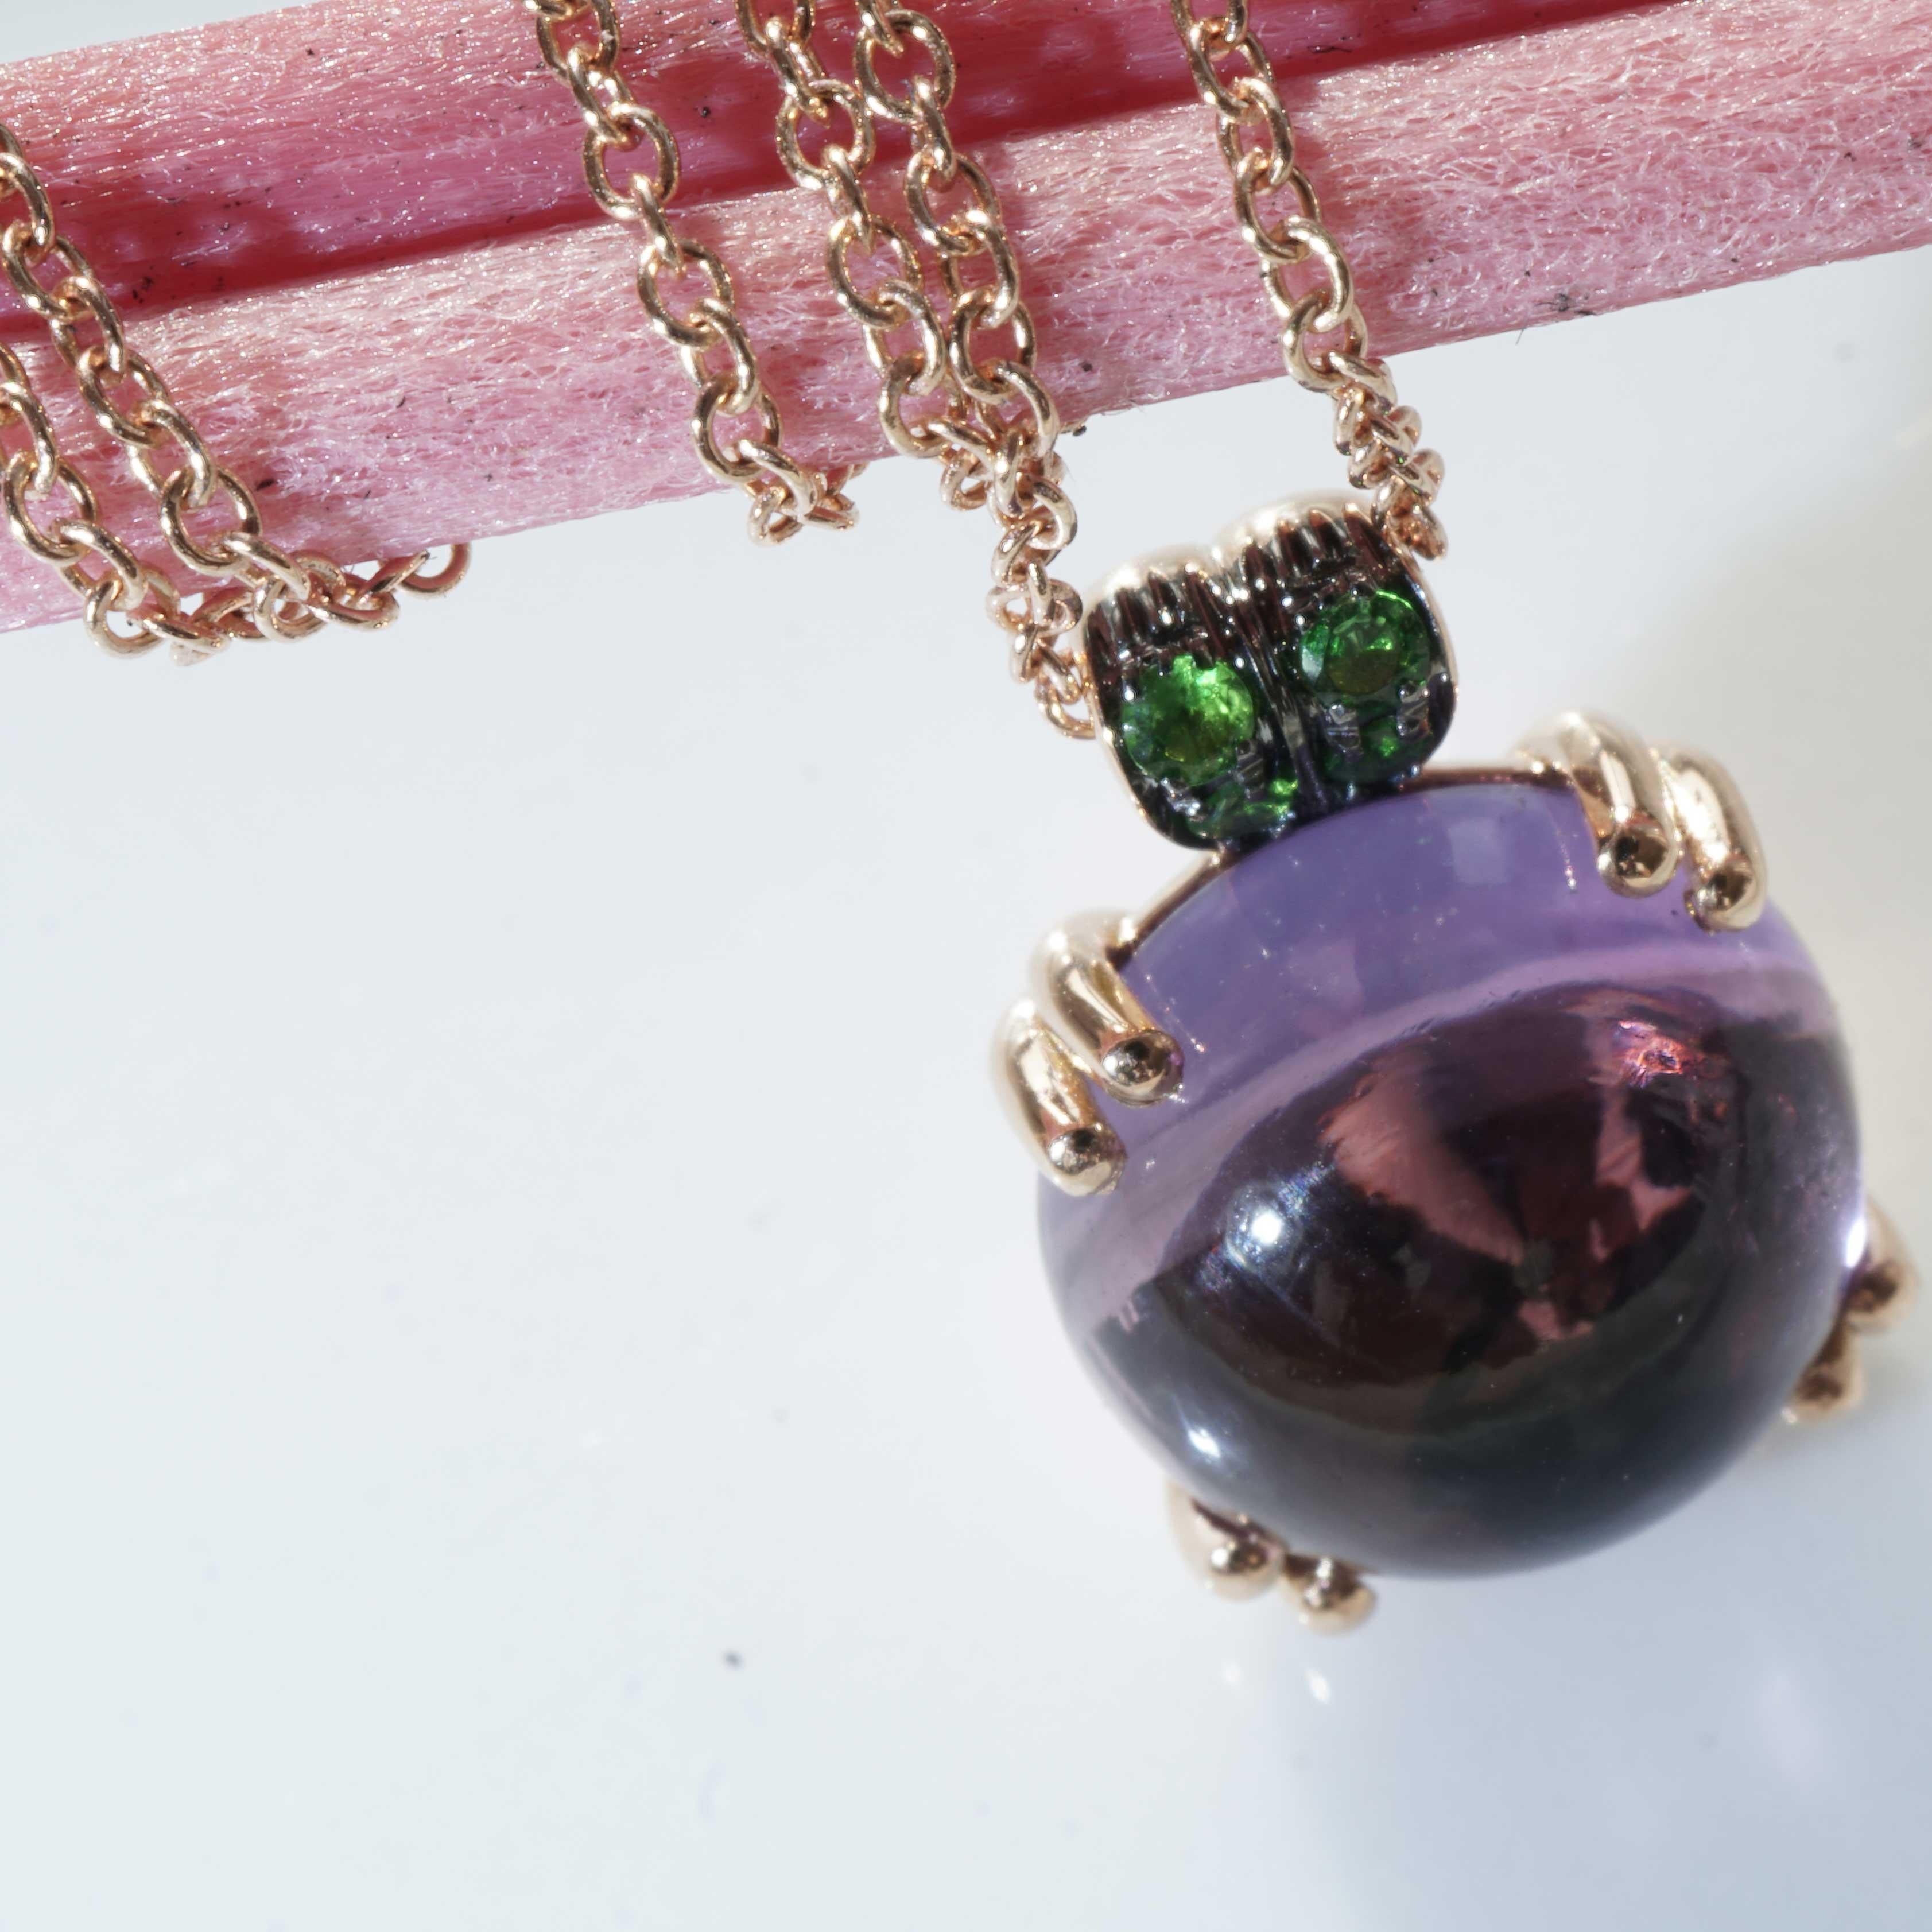 Cabochon Amethyst Tsavorite Necklace with Chain sweet Bubbles made in Italy so unique For Sale